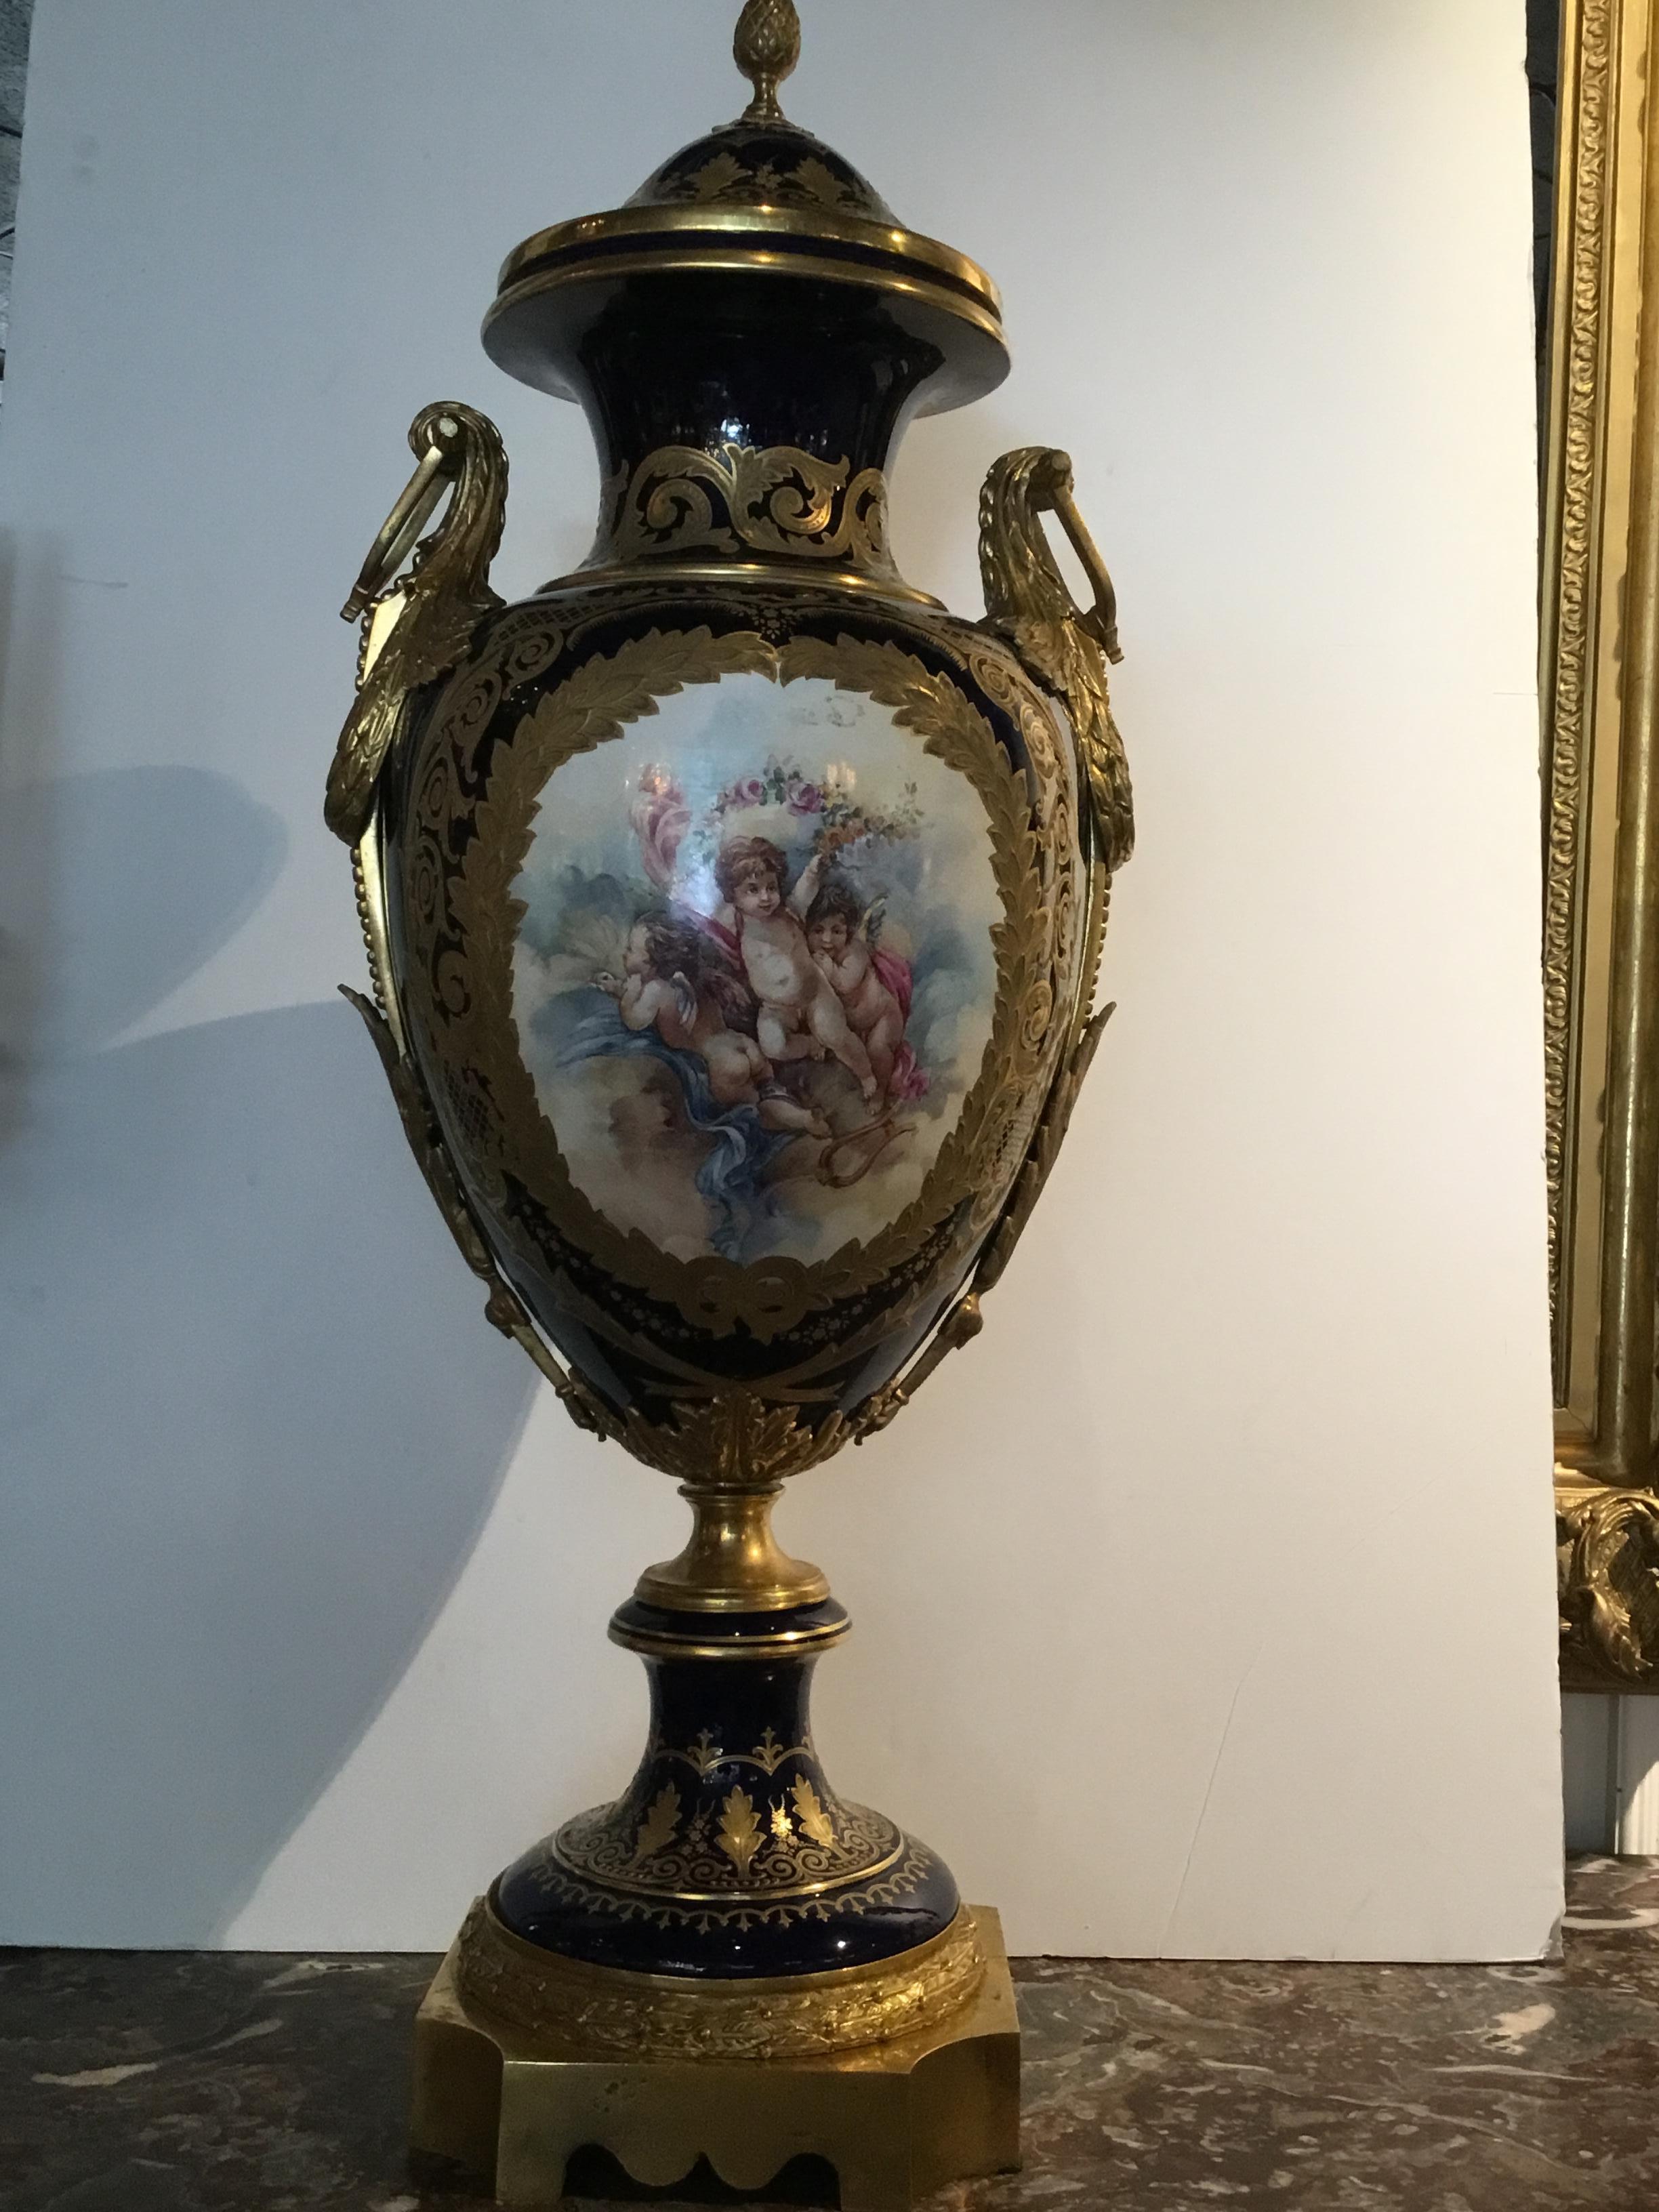 Palace size urn in cobalt and gold hues with playful angels painted
On the front of the urn and floral and foliate designs painted on
The verso. Gilt bronze swirled handles are mounted at the sides.
This piece is Artist-signed on the lower right